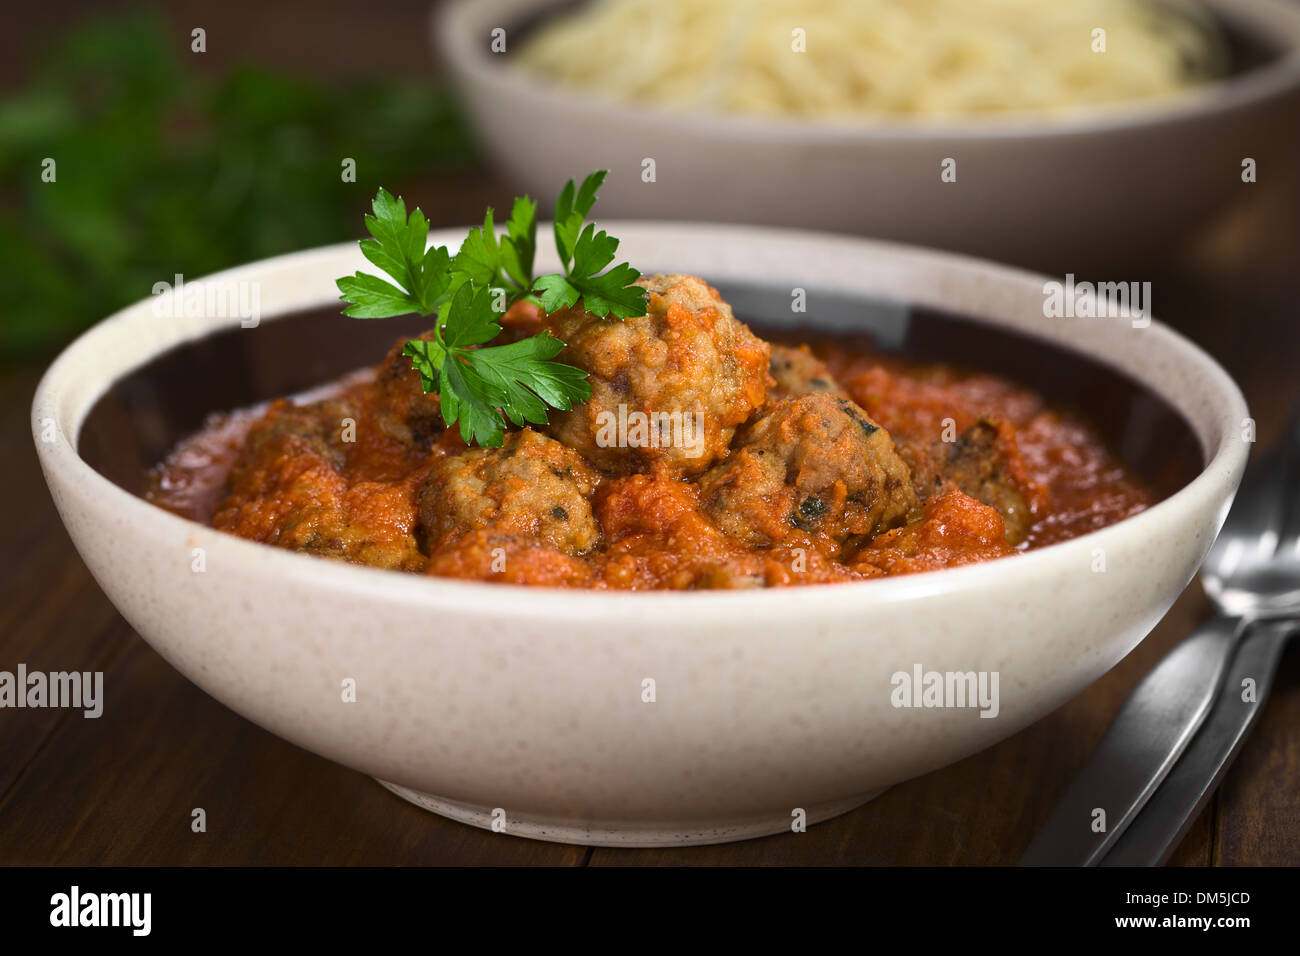 Spanish albondigas (meatballs) in tomato sauce in bowl garnished with parsley Stock Photo